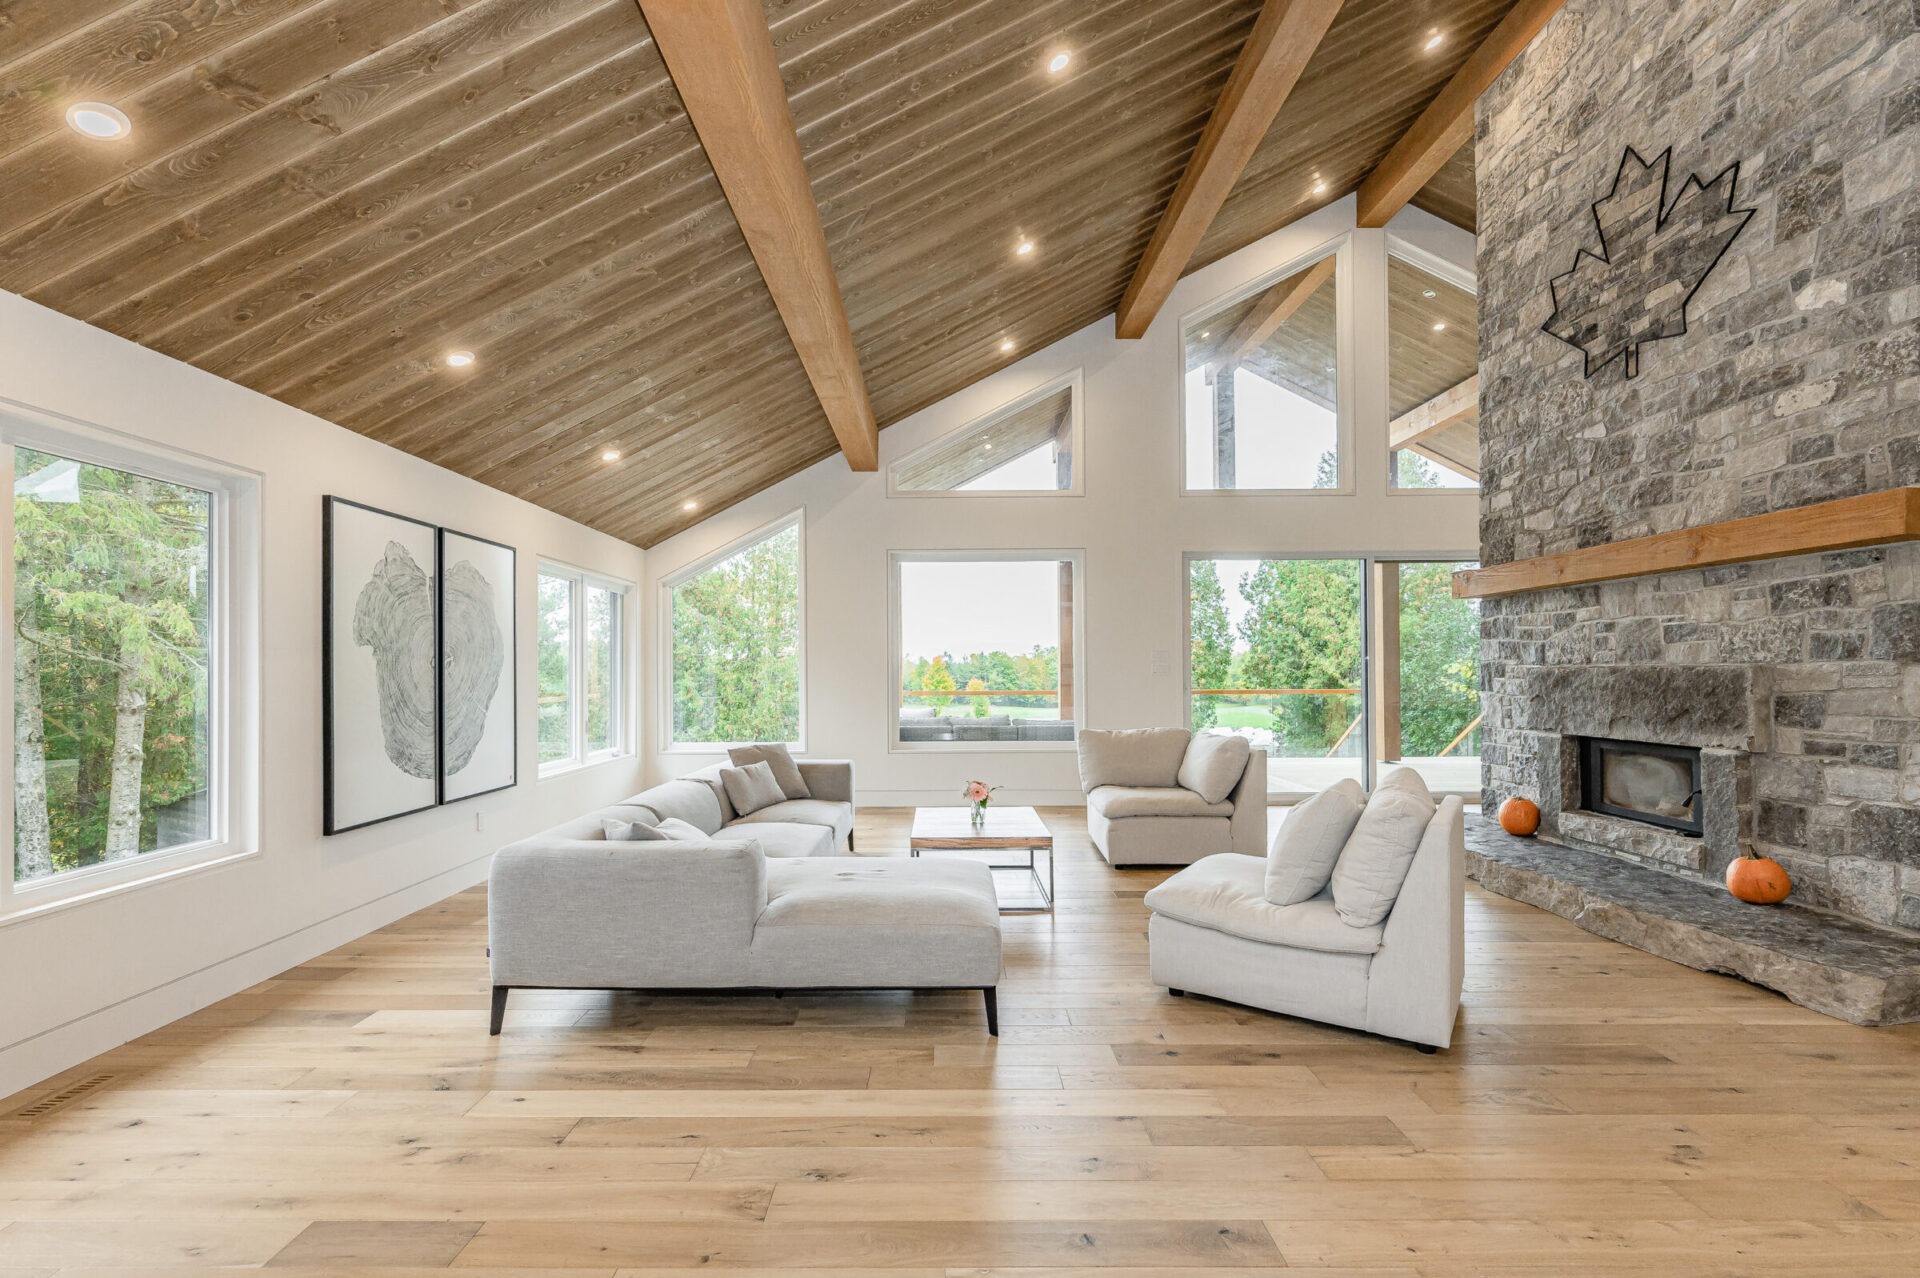 Spacious living room with high ceilings, exposed wooden beams, stone fireplace, large windows, hardwood floors, and neutral-toned furniture. Bright and modern interior.